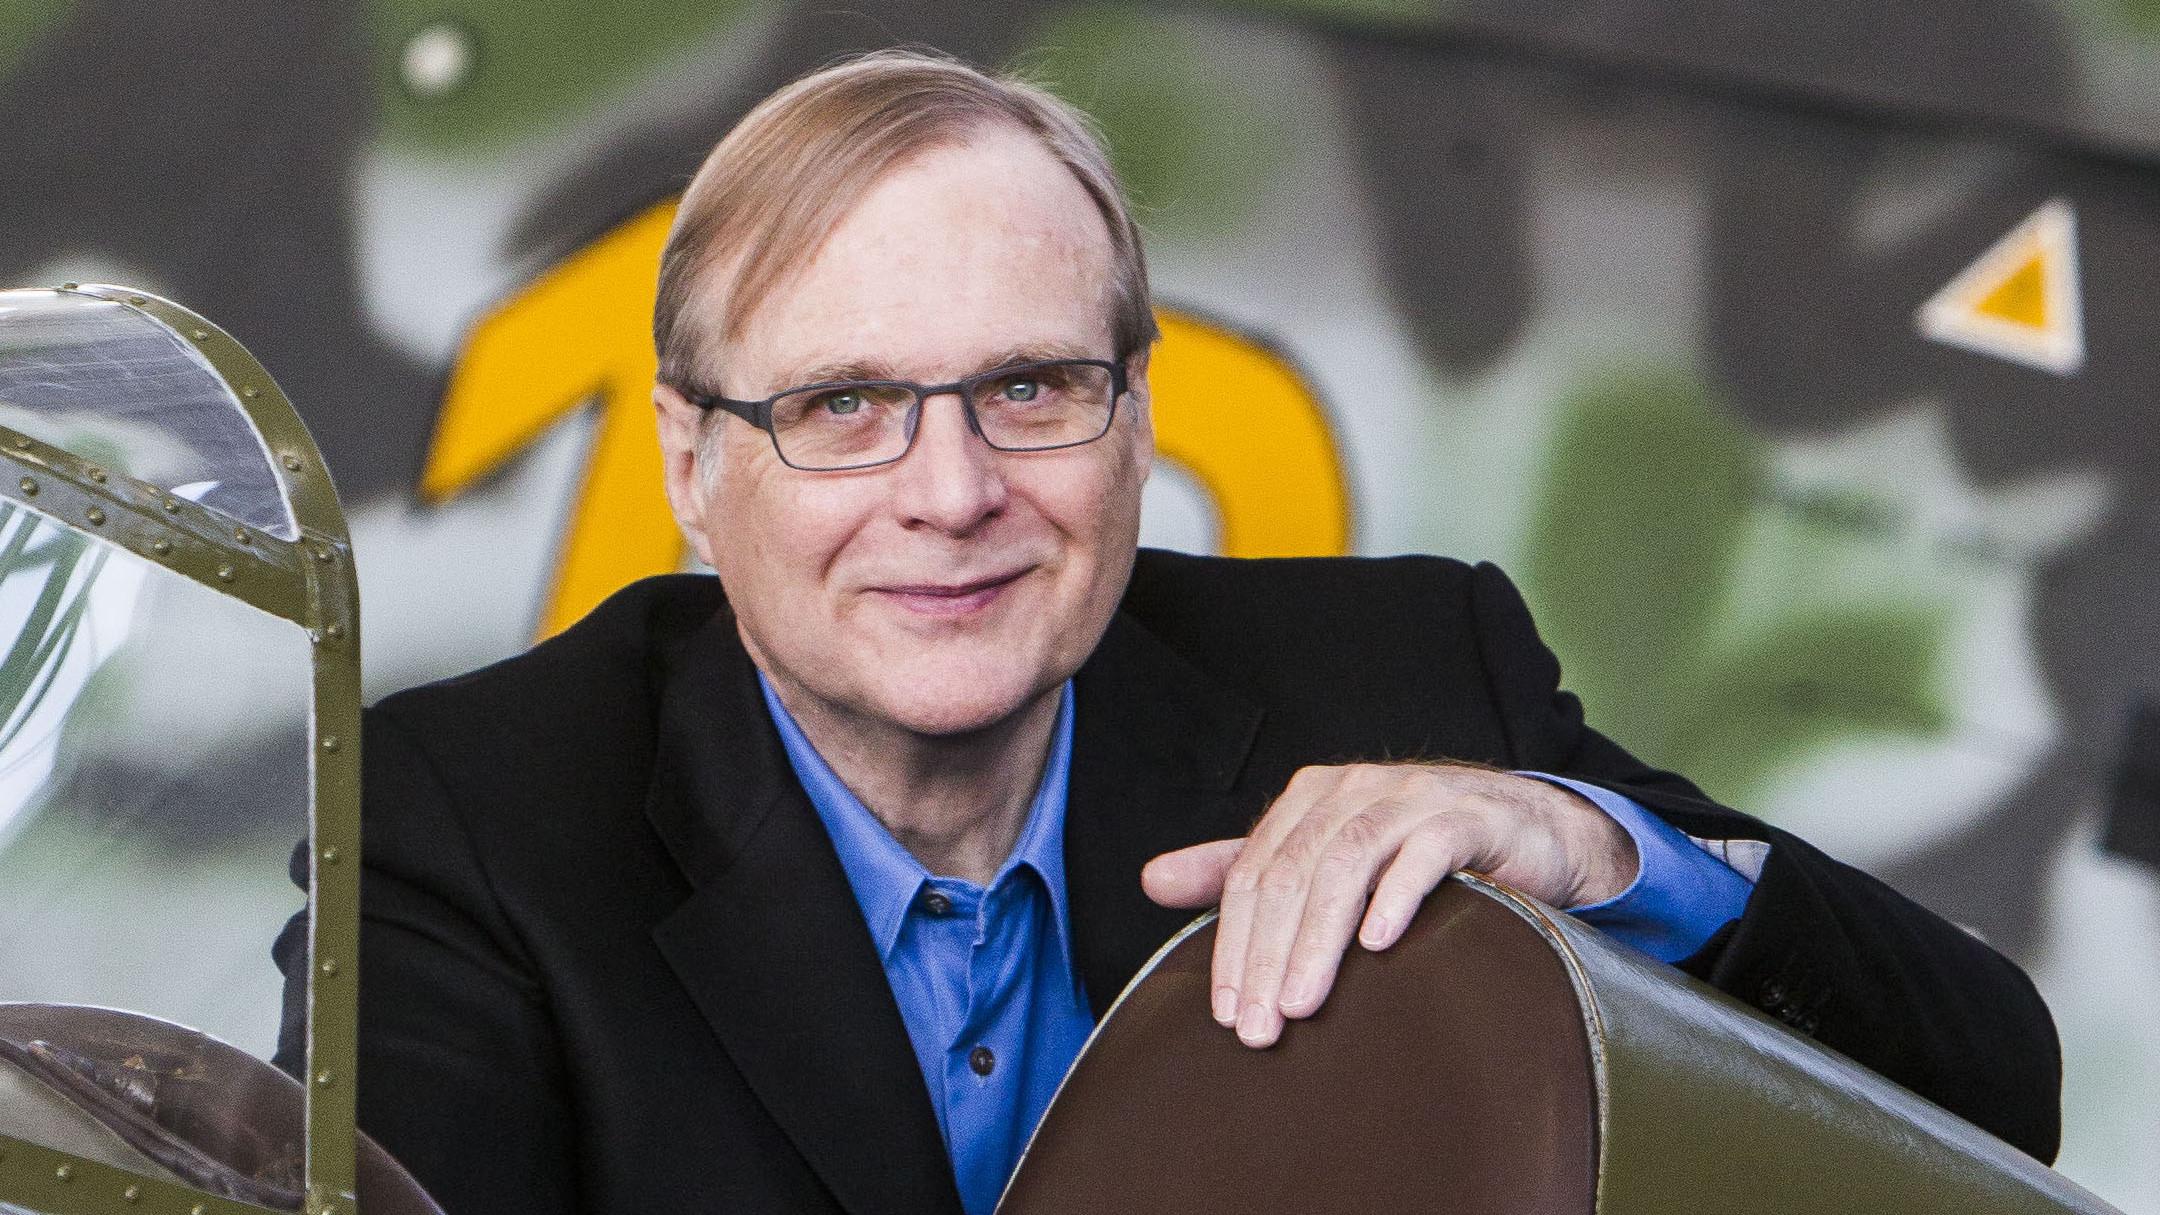 How Did Paul Allen Convert His Technical Knowledge into A Technical Business?